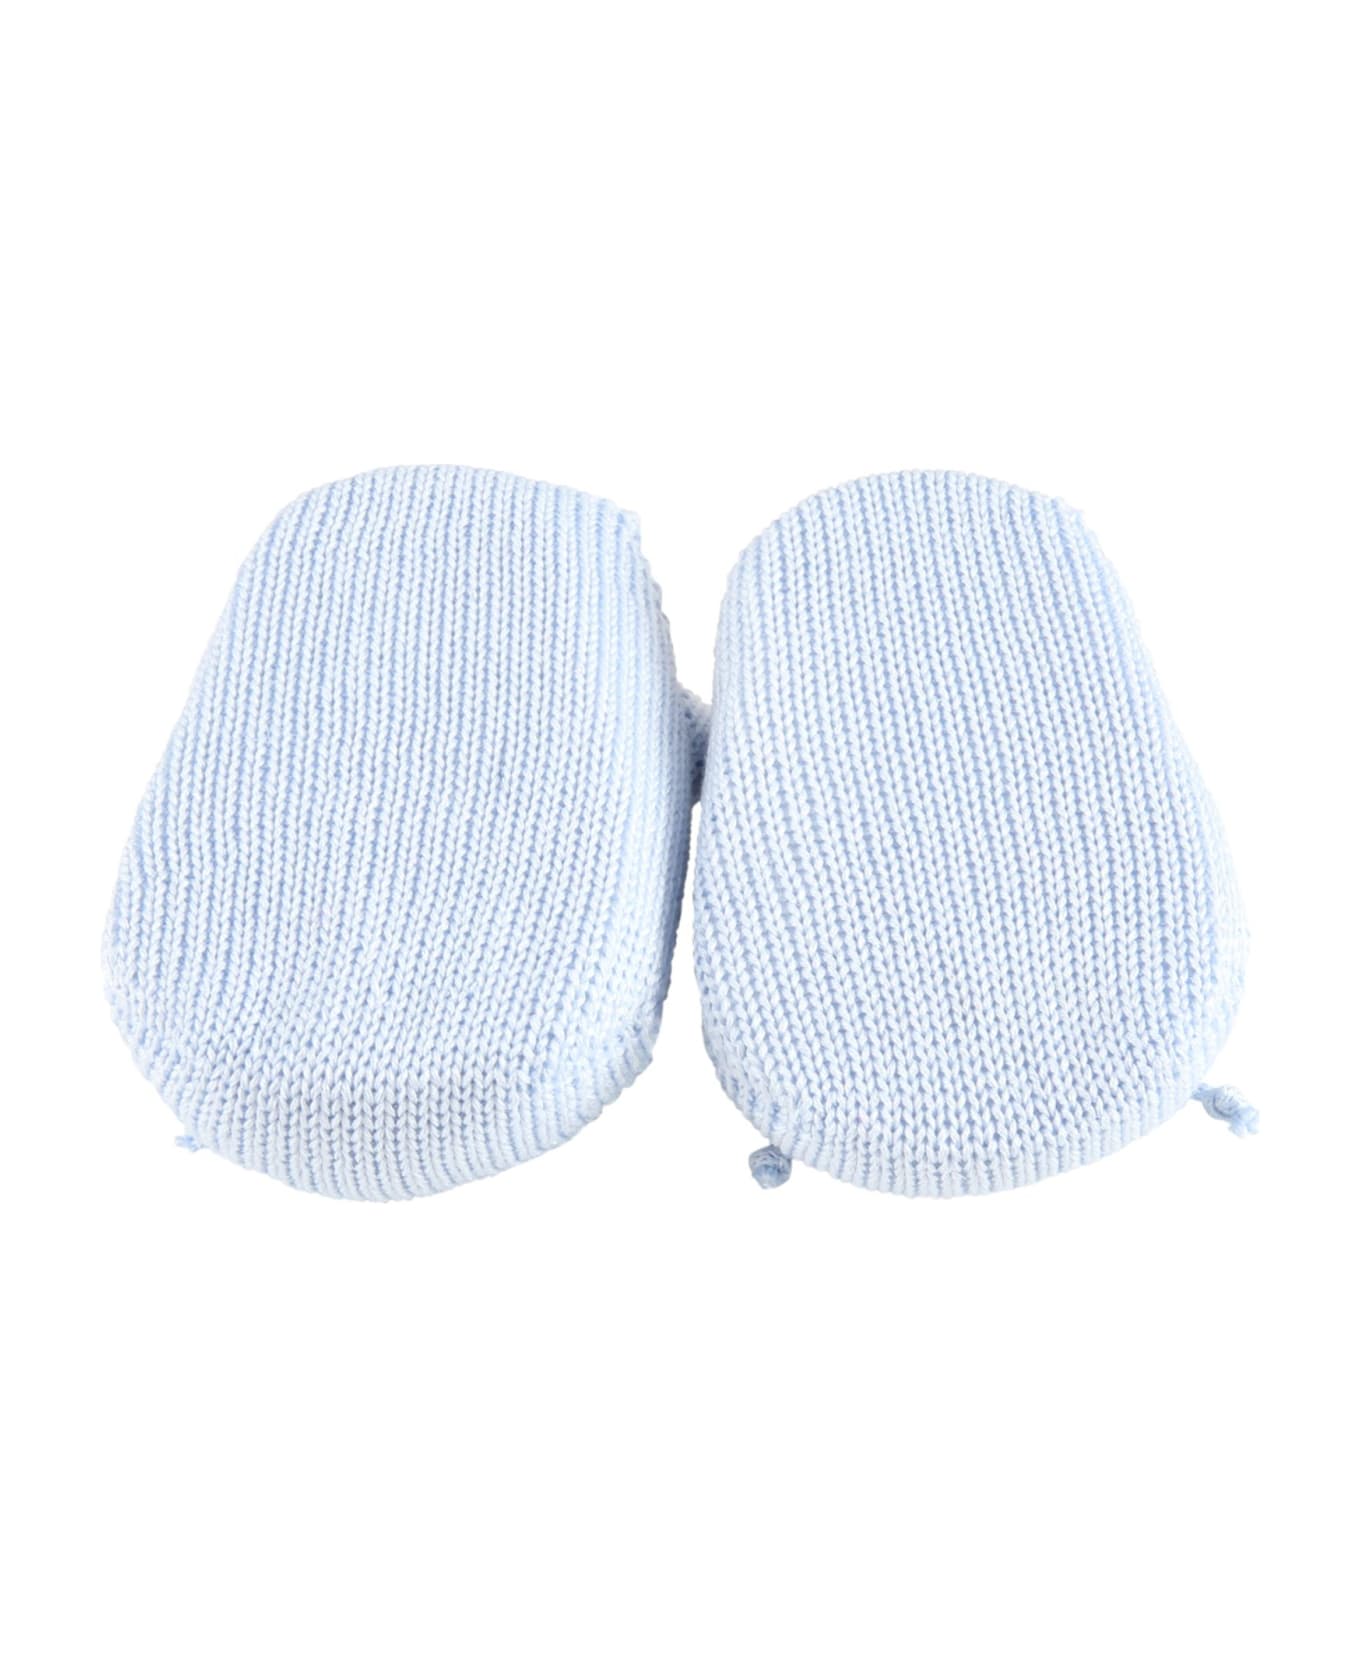 Story Loris Light Blue Bootee For Babyboy - Light Blue アクセサリー＆ギフト